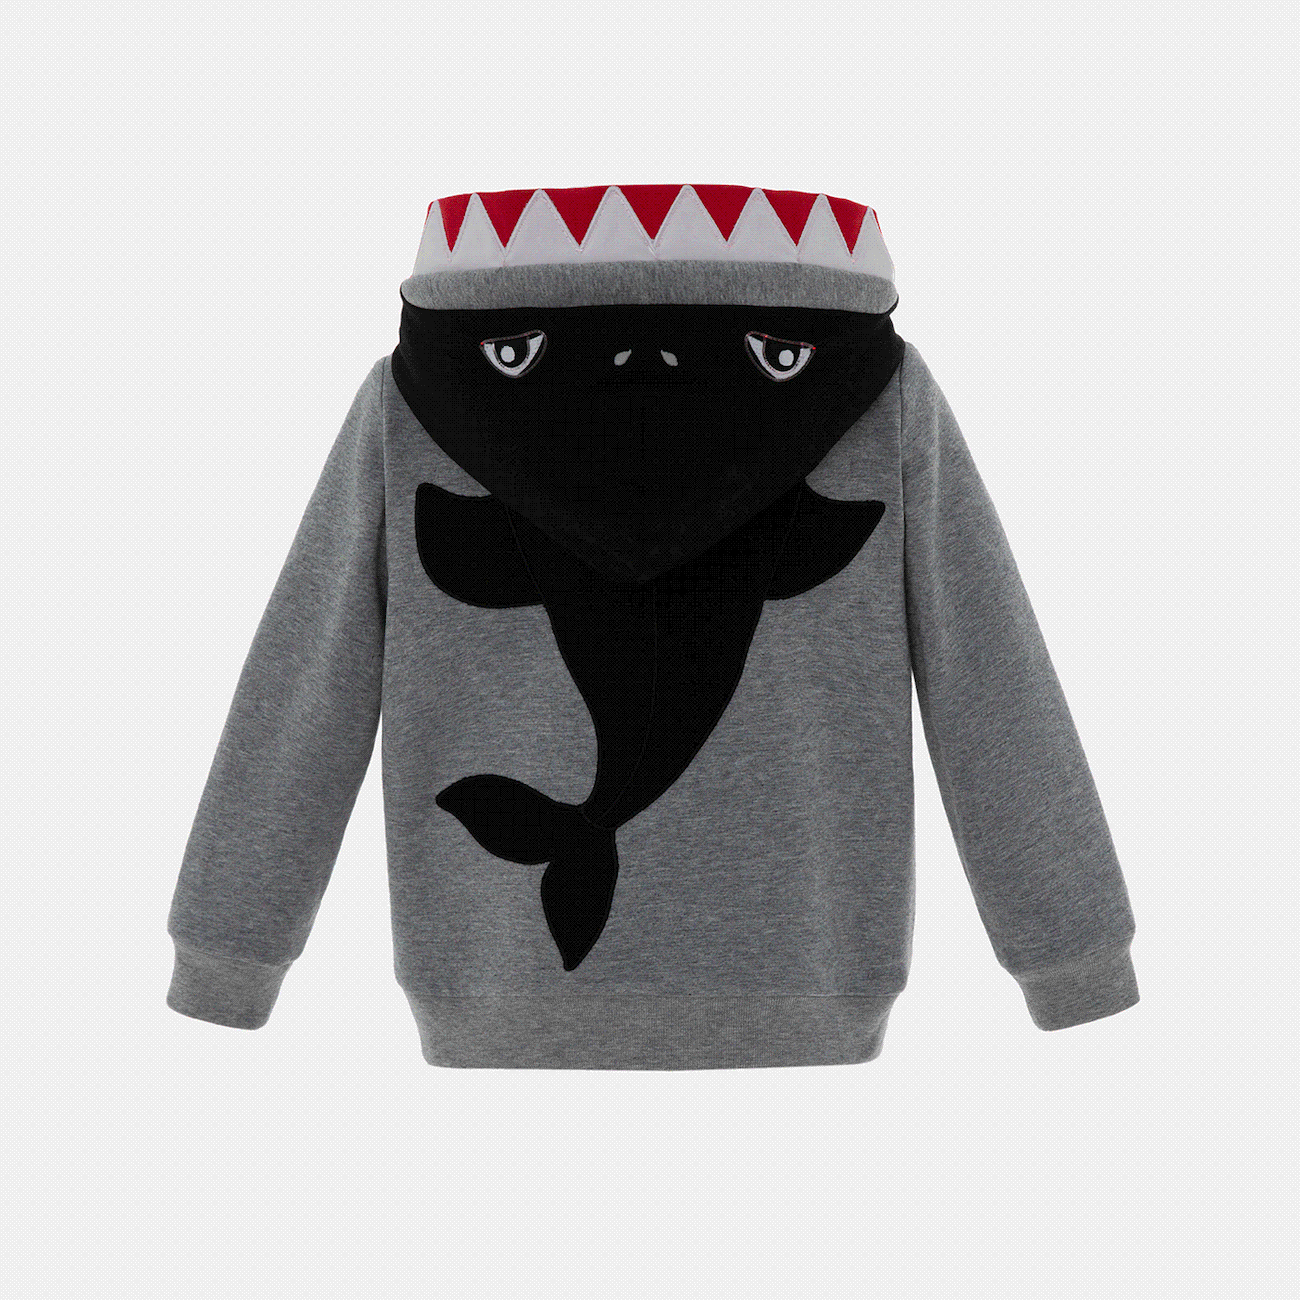 Go-Glow Illuminating Sweatshirt Hoodie with Light Up Shark Including Controller (Built-In Battery) Grey big image 1